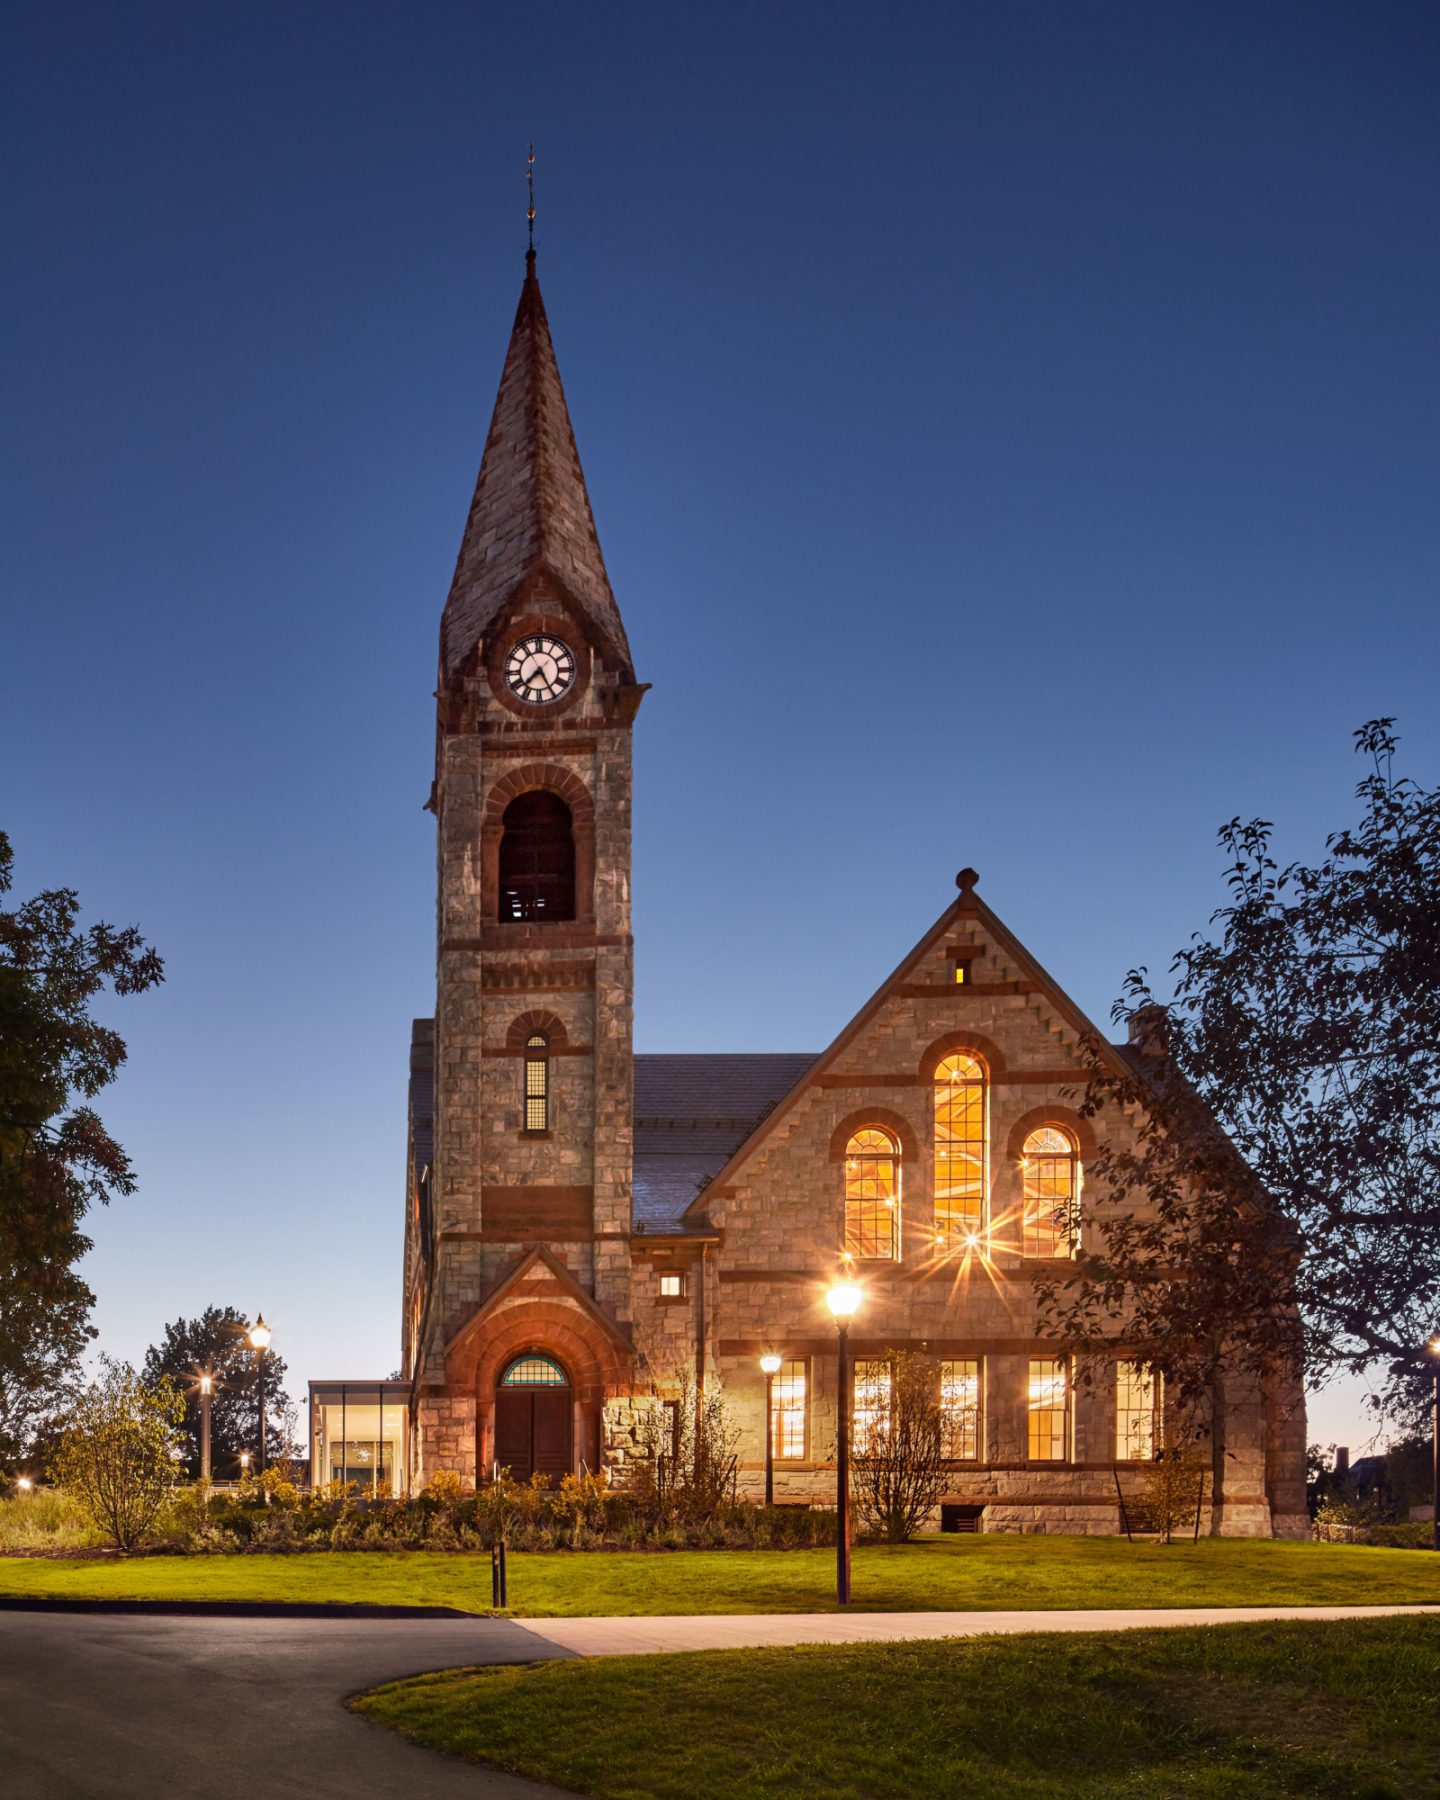 Old Chapel UMASS Amherst - 1884 Richardsonian Romanesque Revival style 19th century building with renovation by Finegold Alexander Architects, Inc. in 2015.